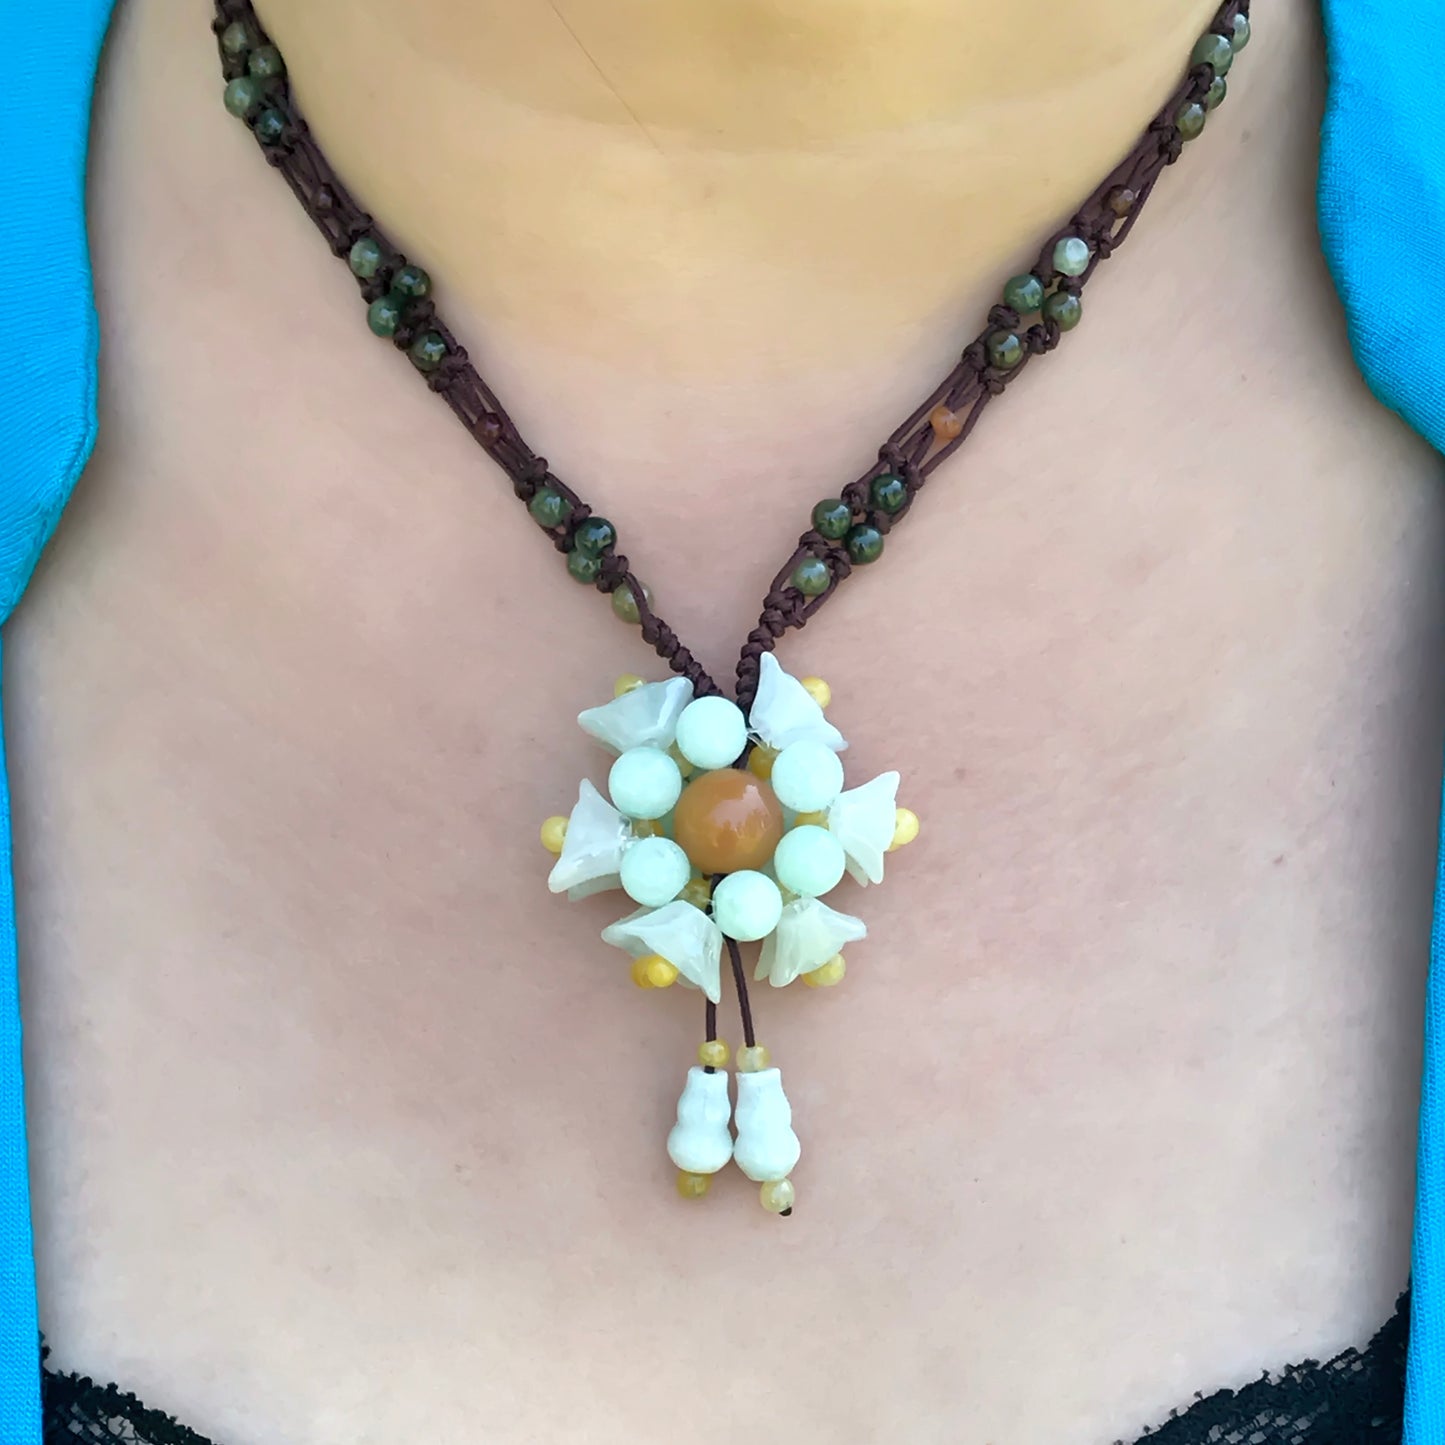 Wear a Burst of Color with Solidaster Flower Jade Necklace Pendant